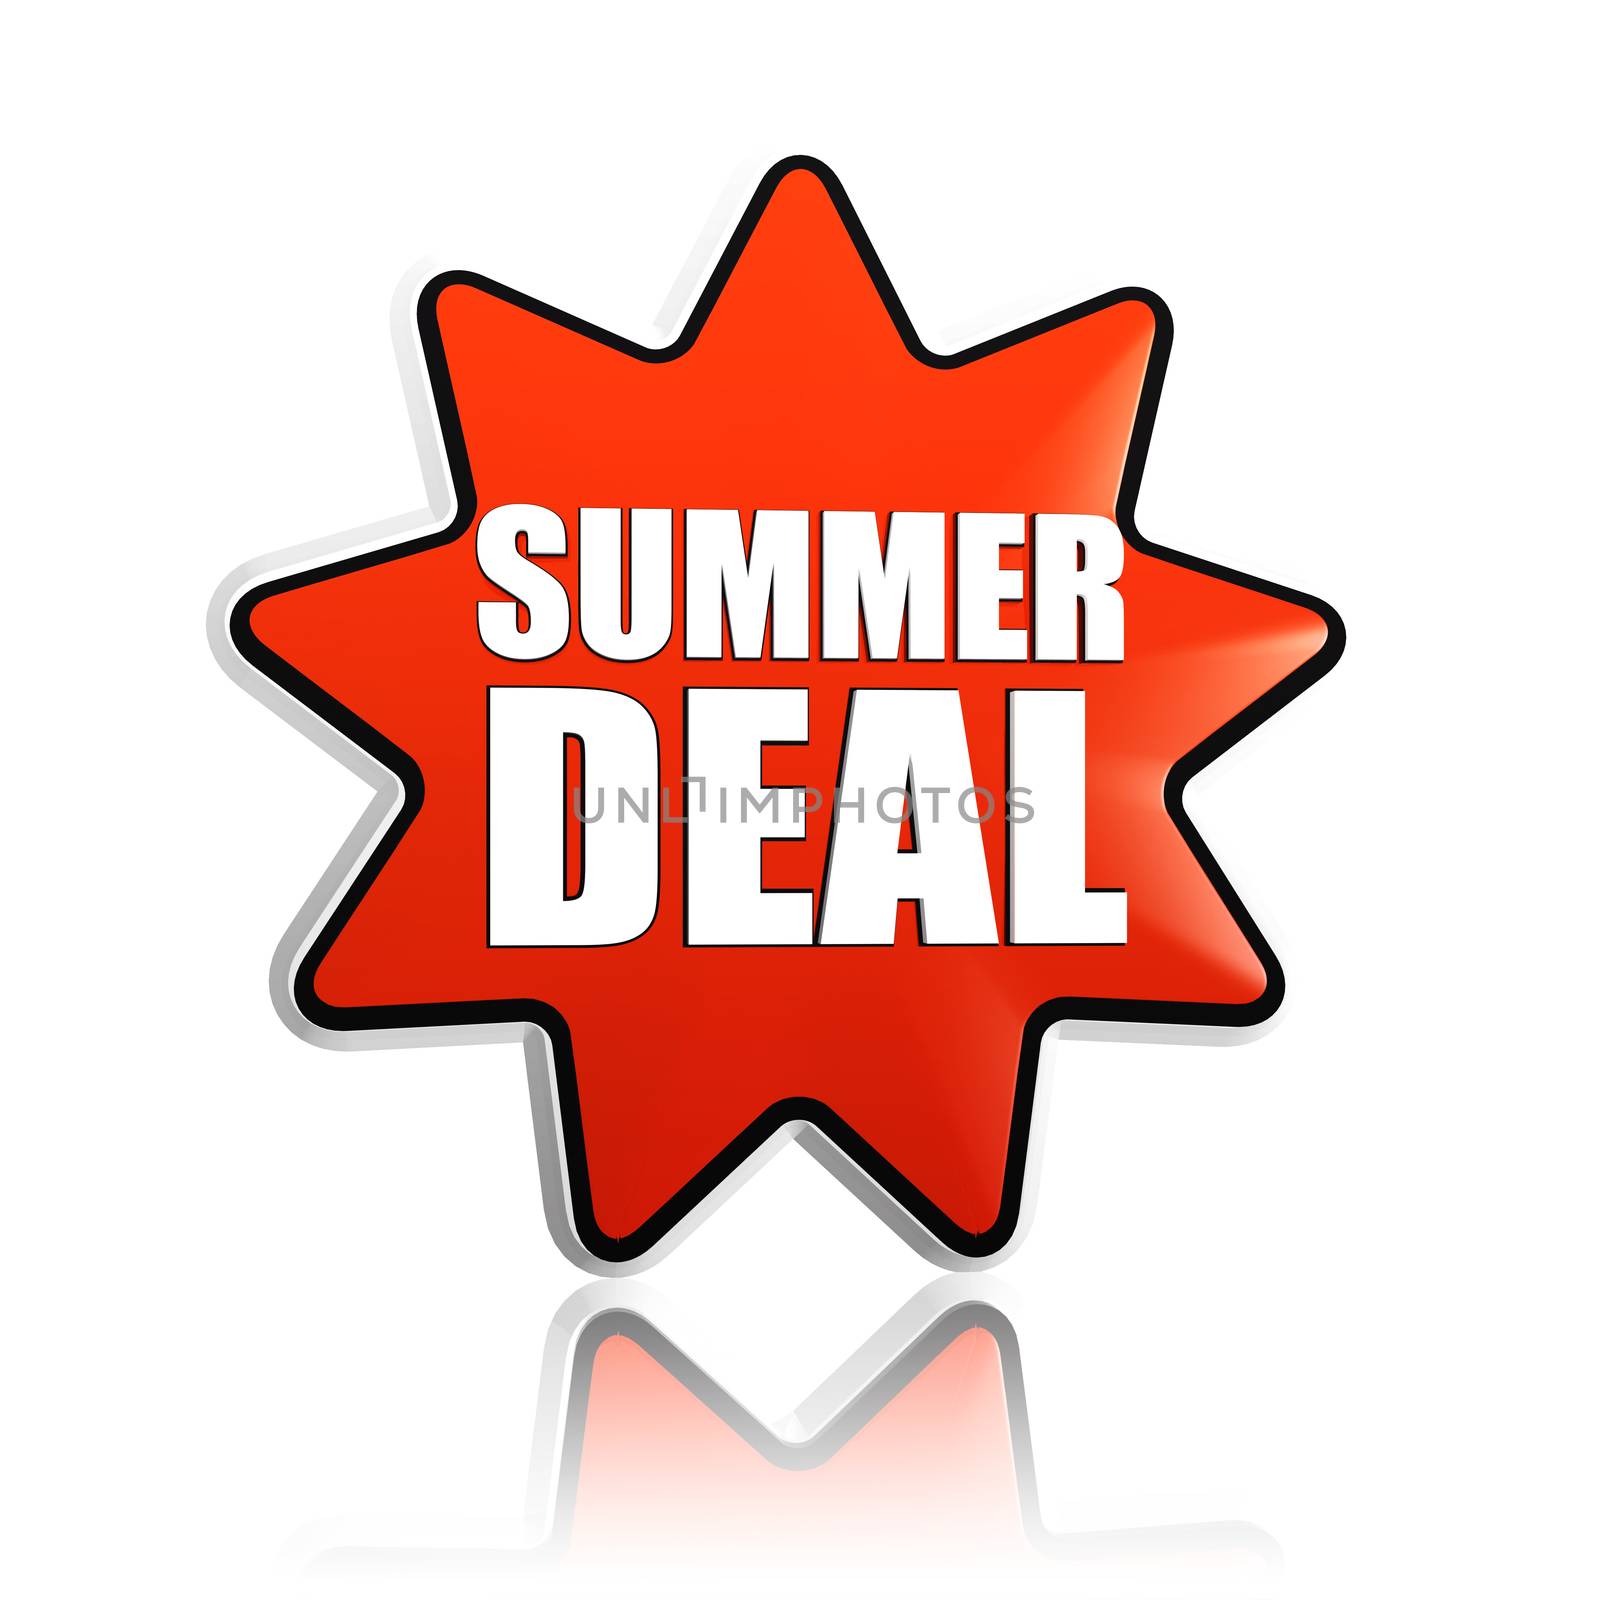 summer deal button - 3d red orange star banner with white text, business concept